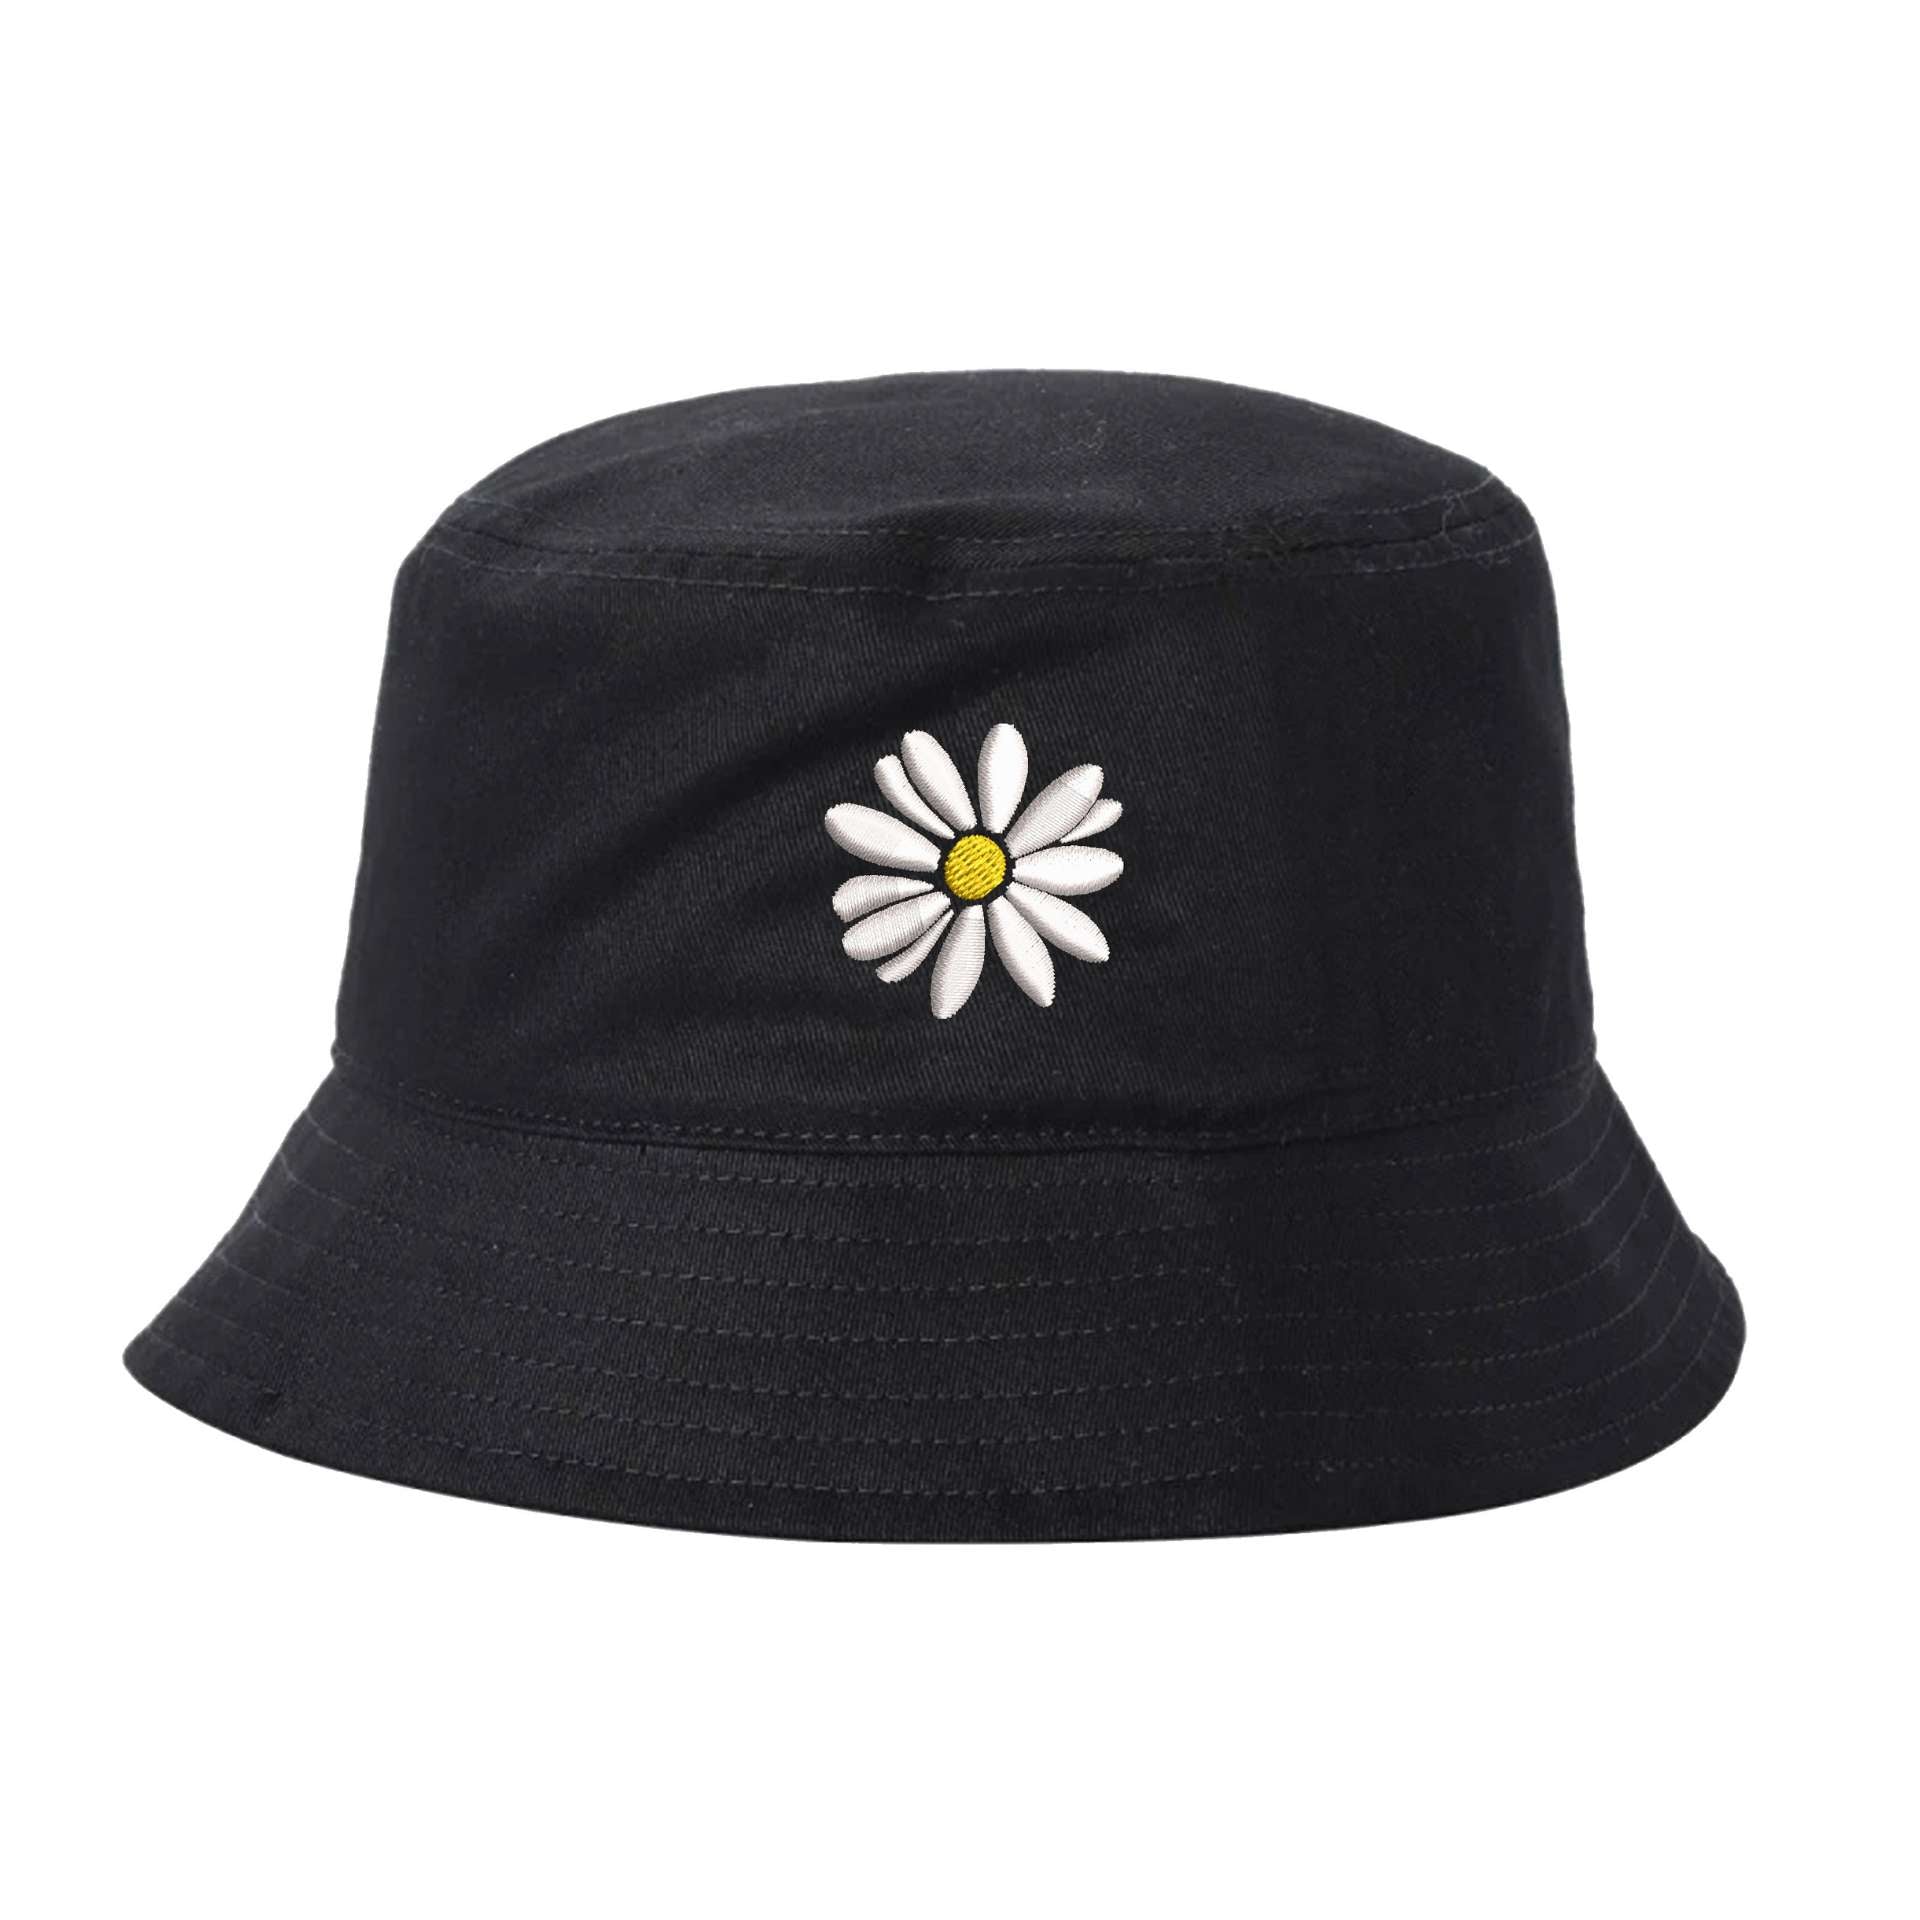 Black Bucket hat embroidered with a daisy flower - DSY Lifestyle